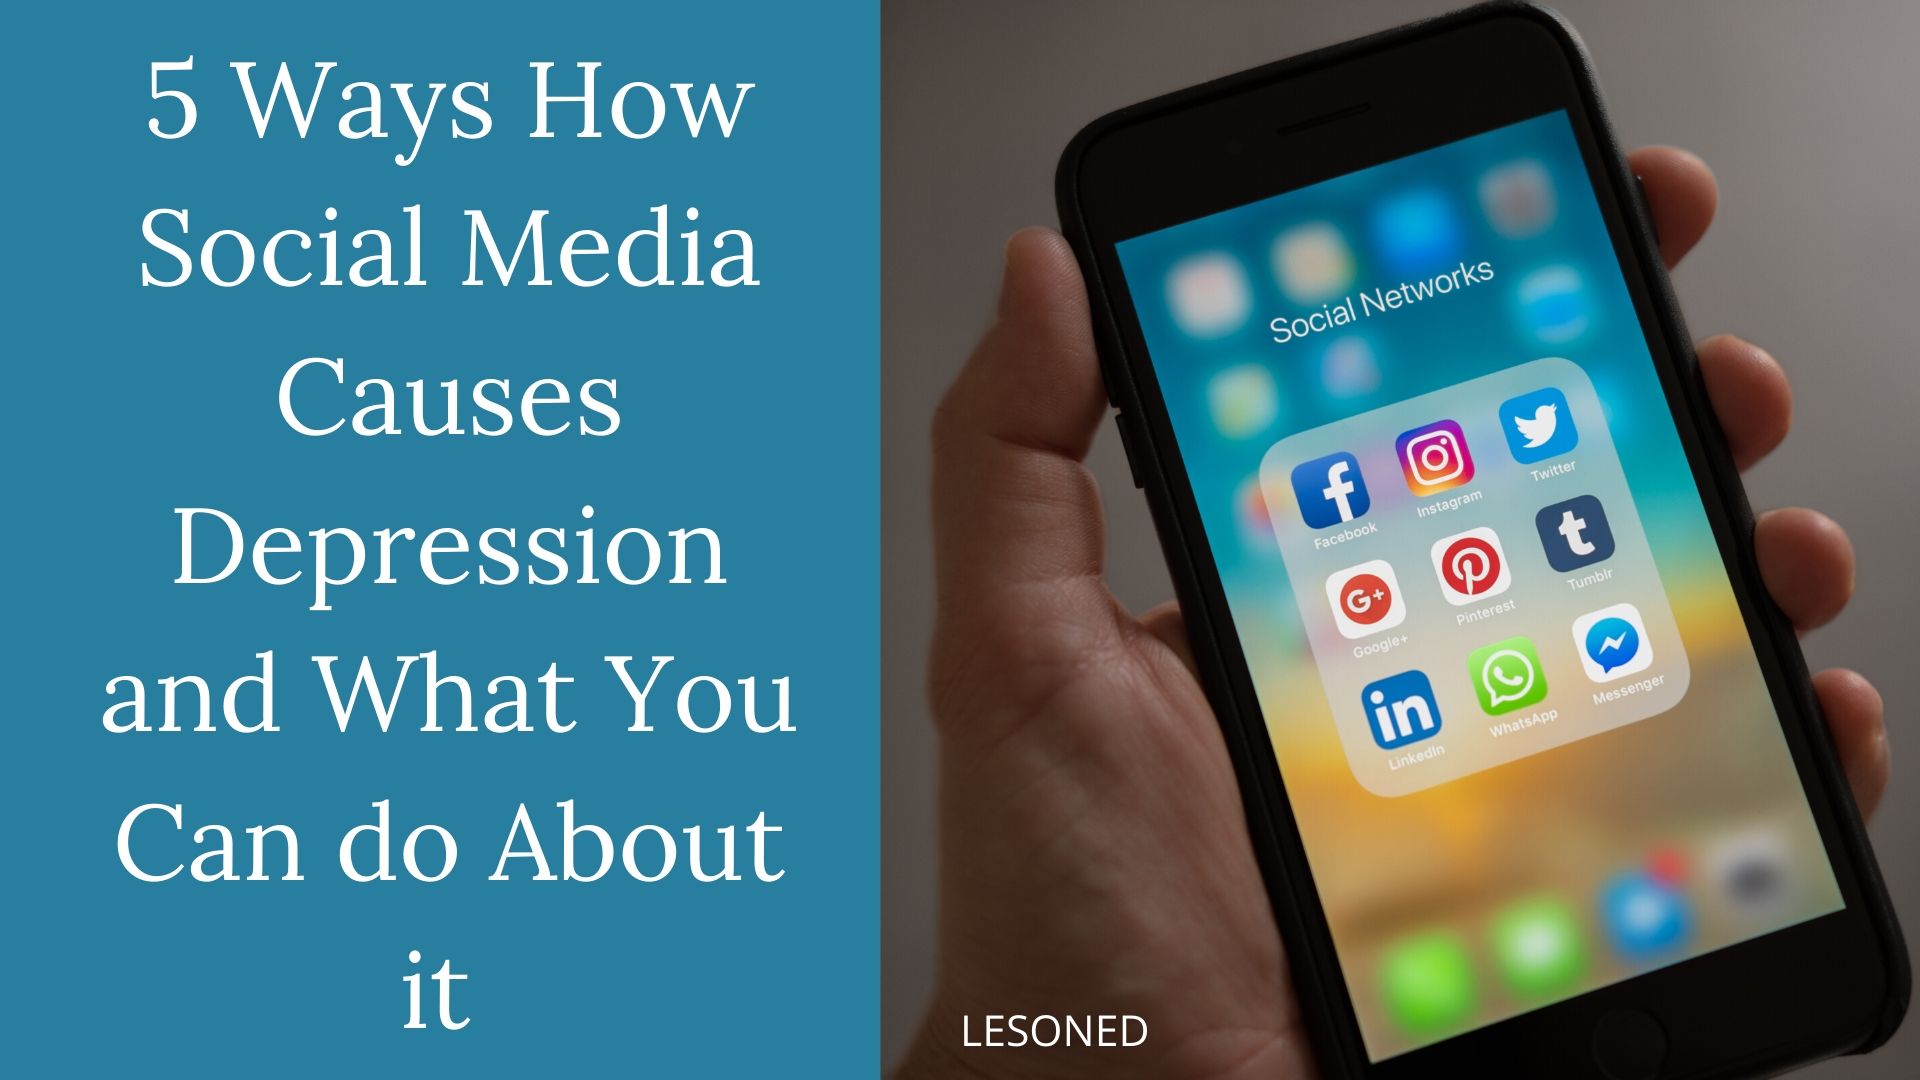 5 Ways How Social Media Causes Depression and What You Can do About it